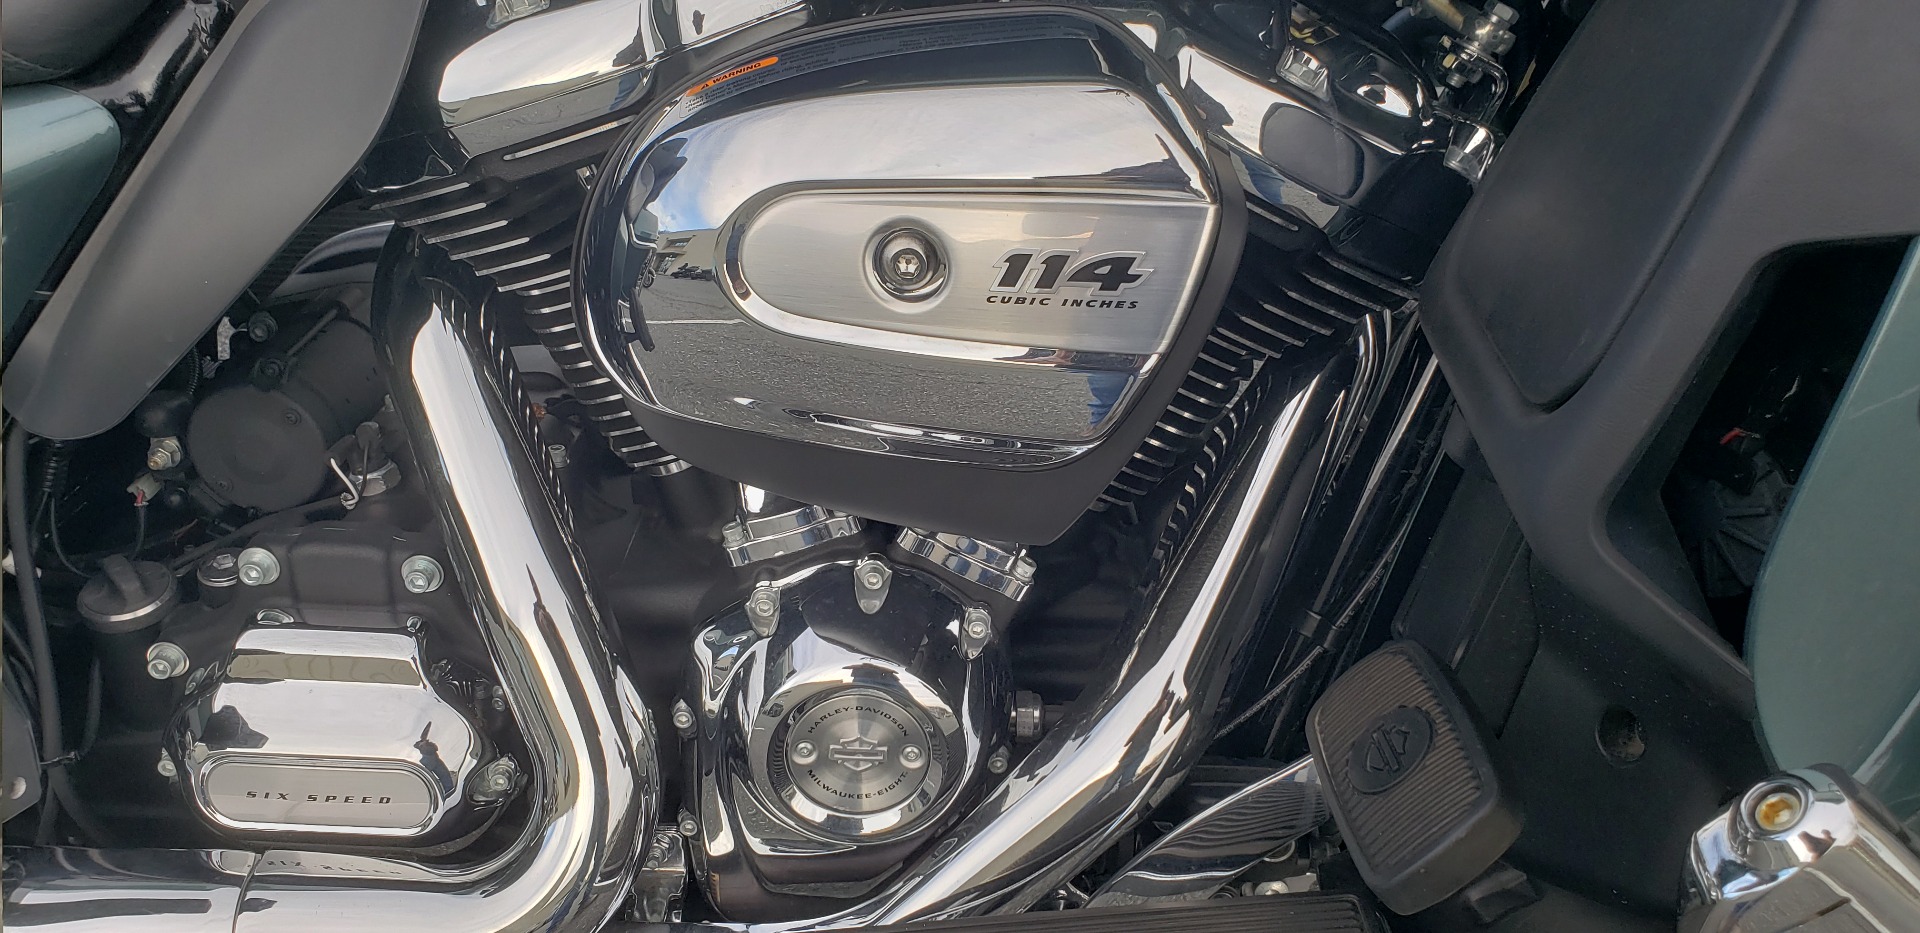 2020 Harley-Davidson ROAD GLIDE LIMITED in Dumfries, Virginia - Photo 3